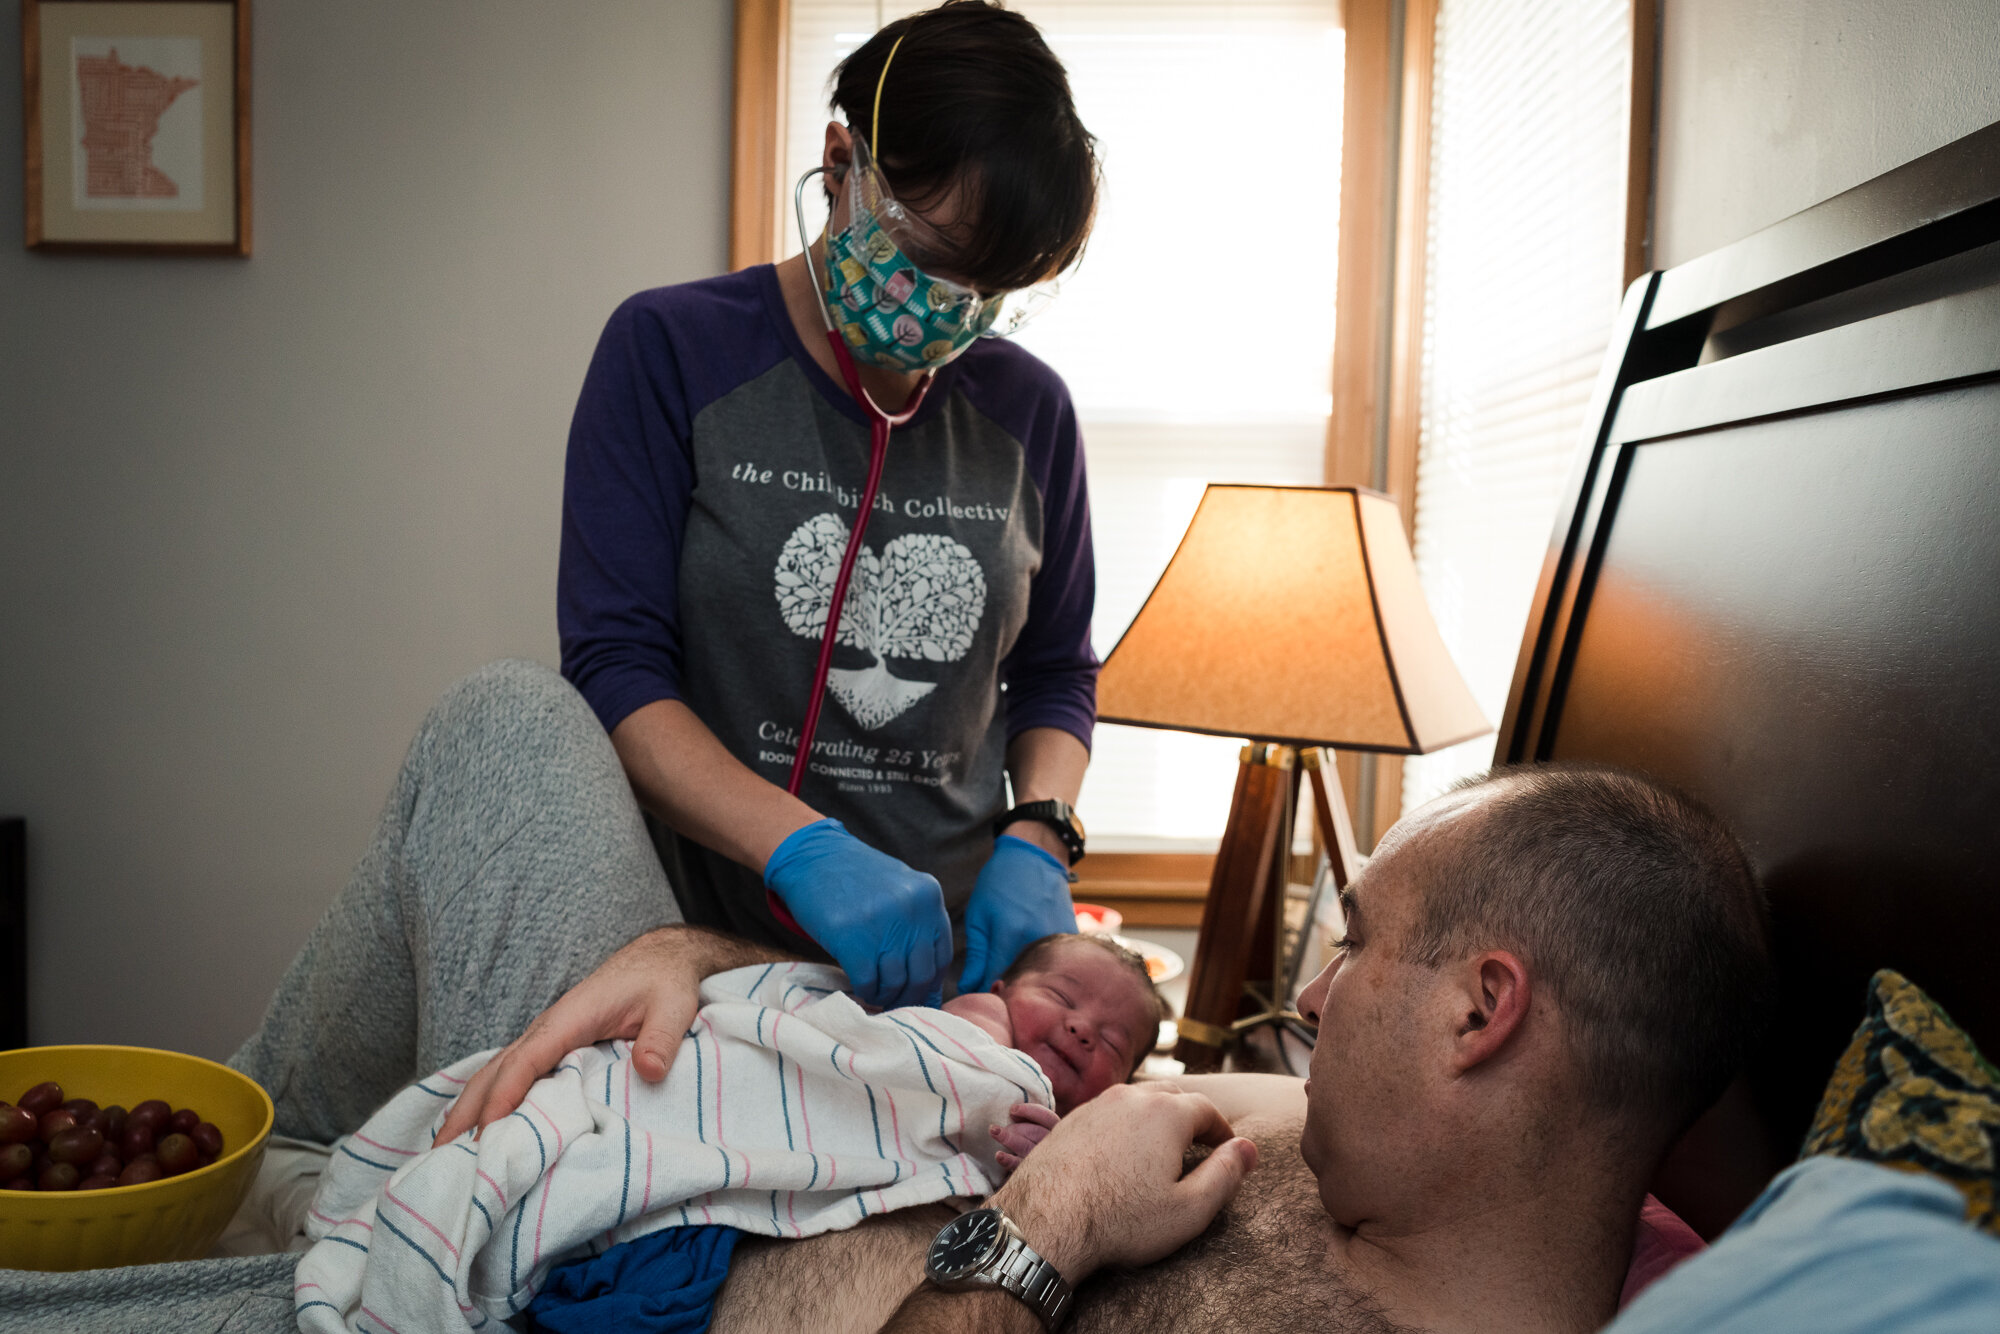 Gather Birth Cooperative- Doula Support and Birth Photography in Minneapolis - April 15, 2020 - 161521.jpg